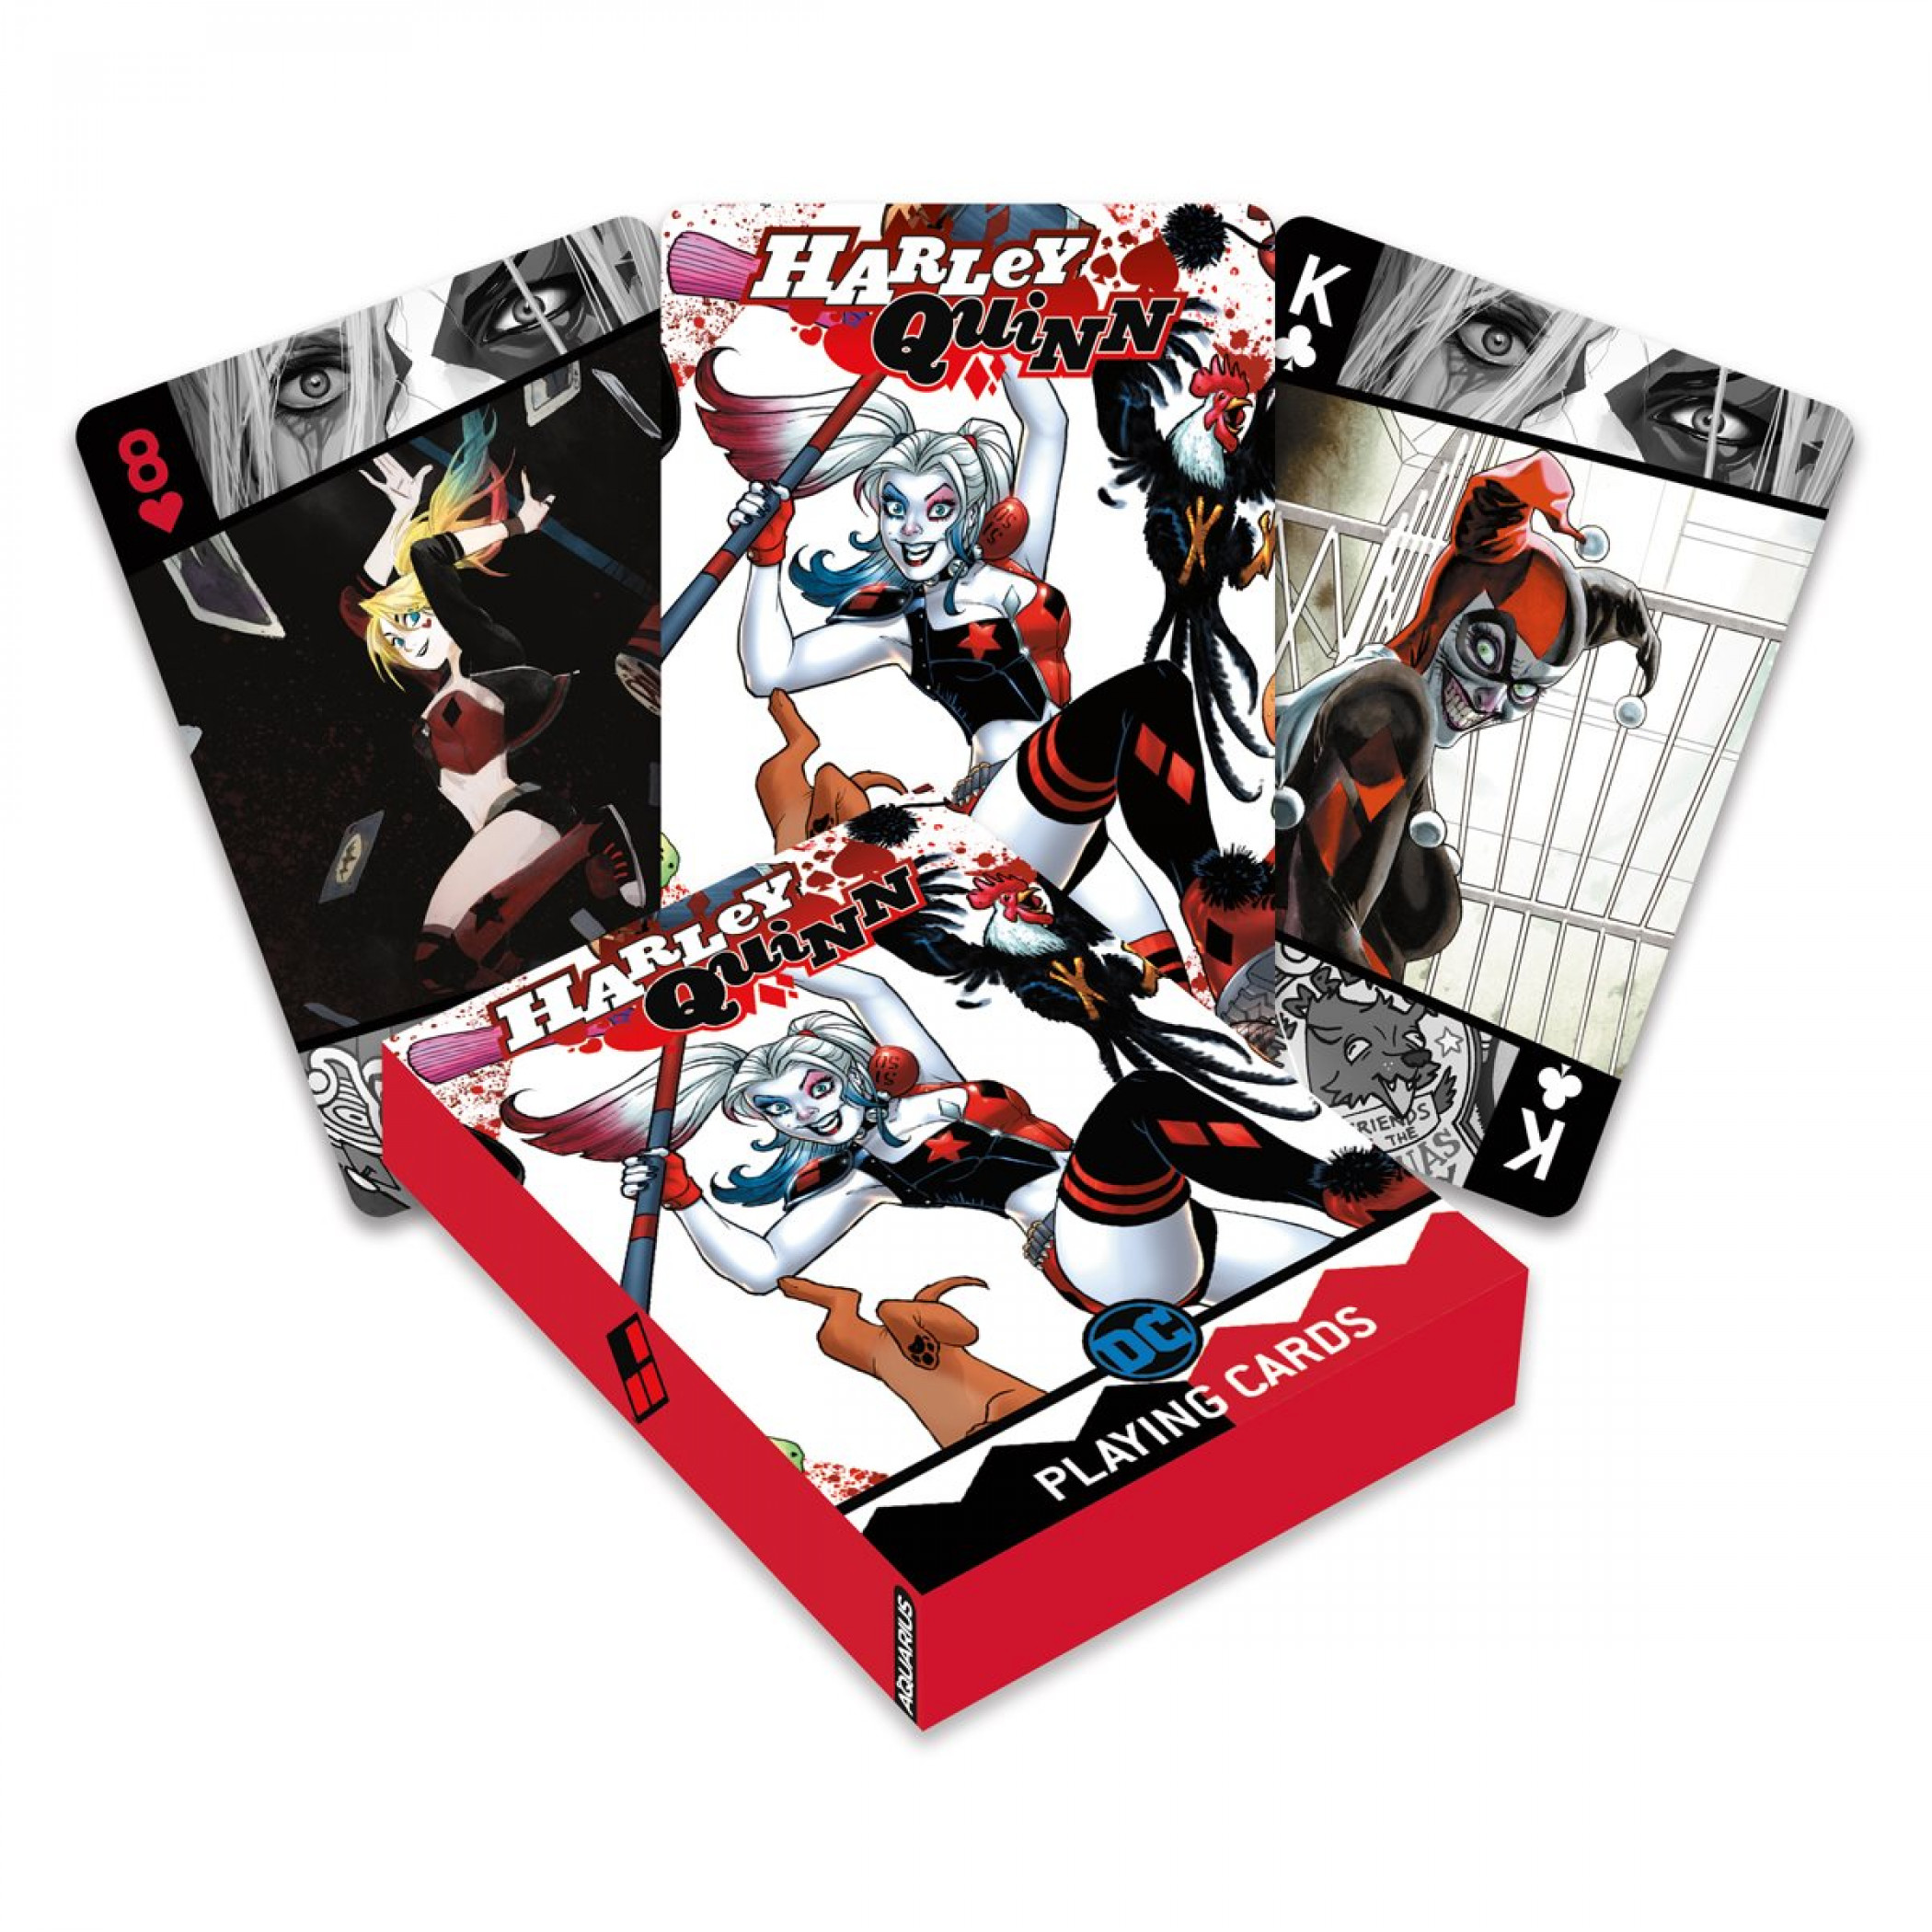 DC Comics Harley Quinn Panels Deck of Playing Cards